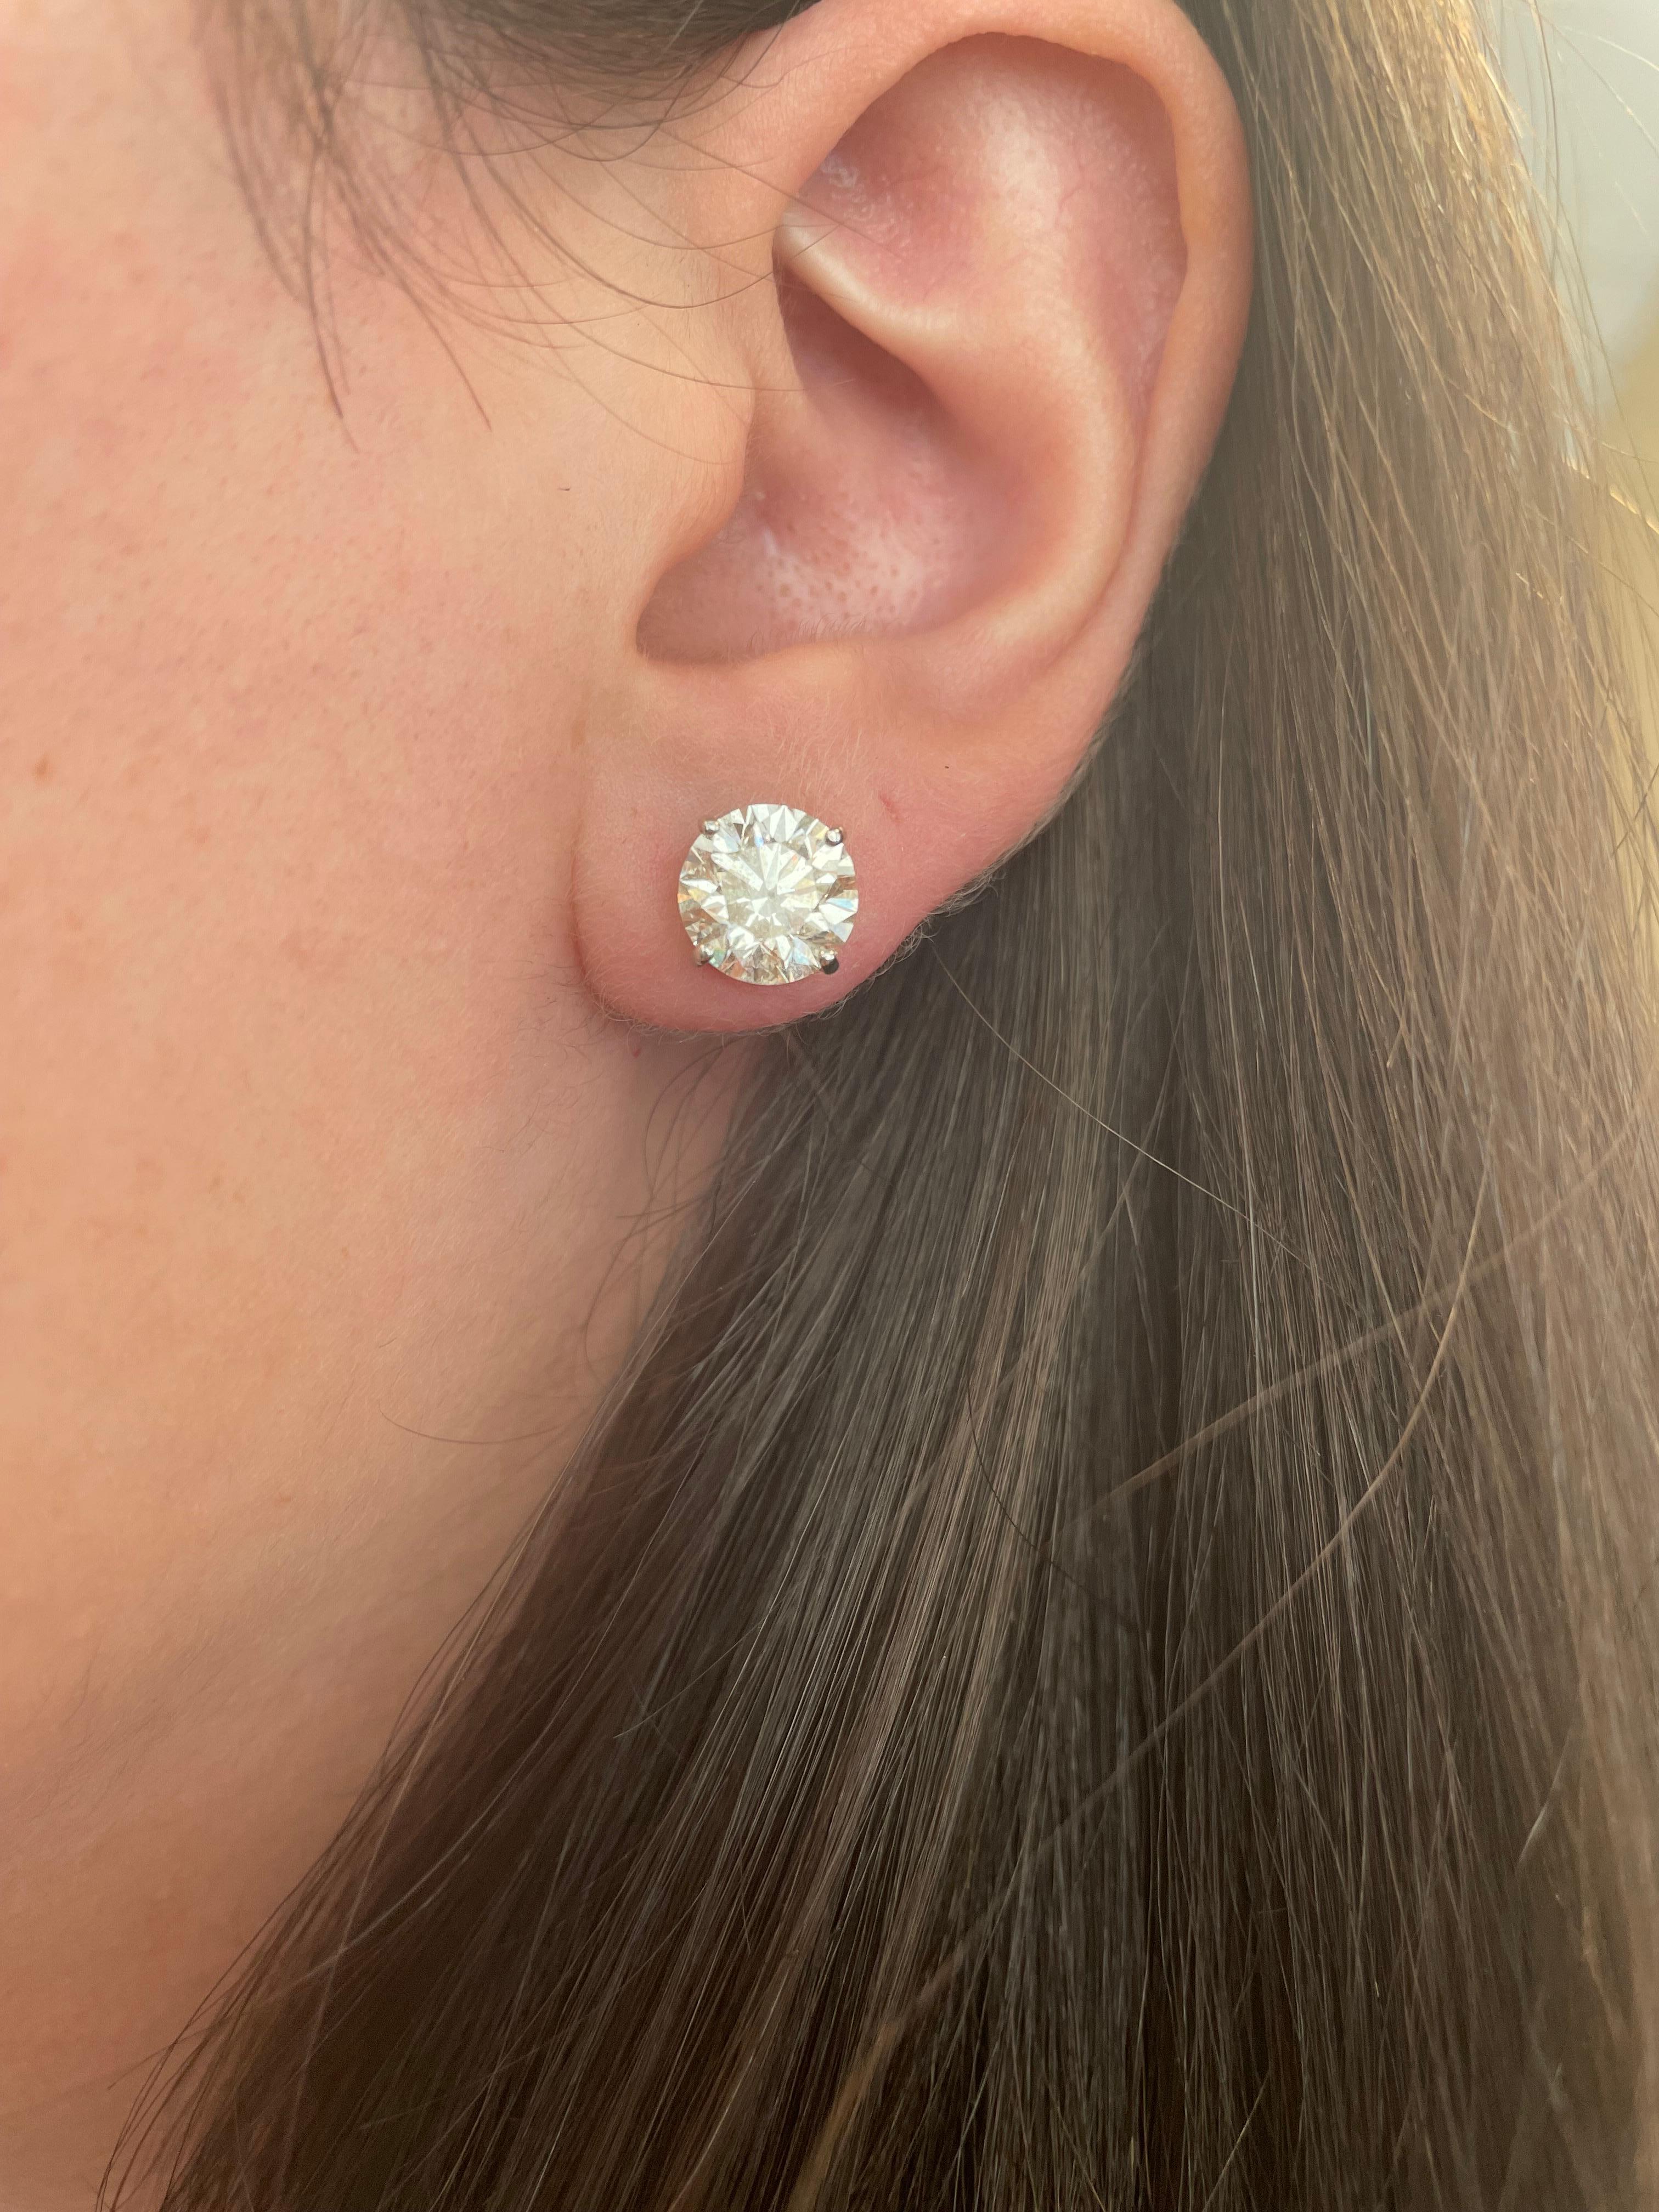 Classic diamond stud earrings, each stone EGL certified. High jewelry by Alexander Beverly Hills.
Two matching round brilliant diamonds 4.91 carats total. One stone H color grade and the other I color grade, both VS2 clarity. 14k white